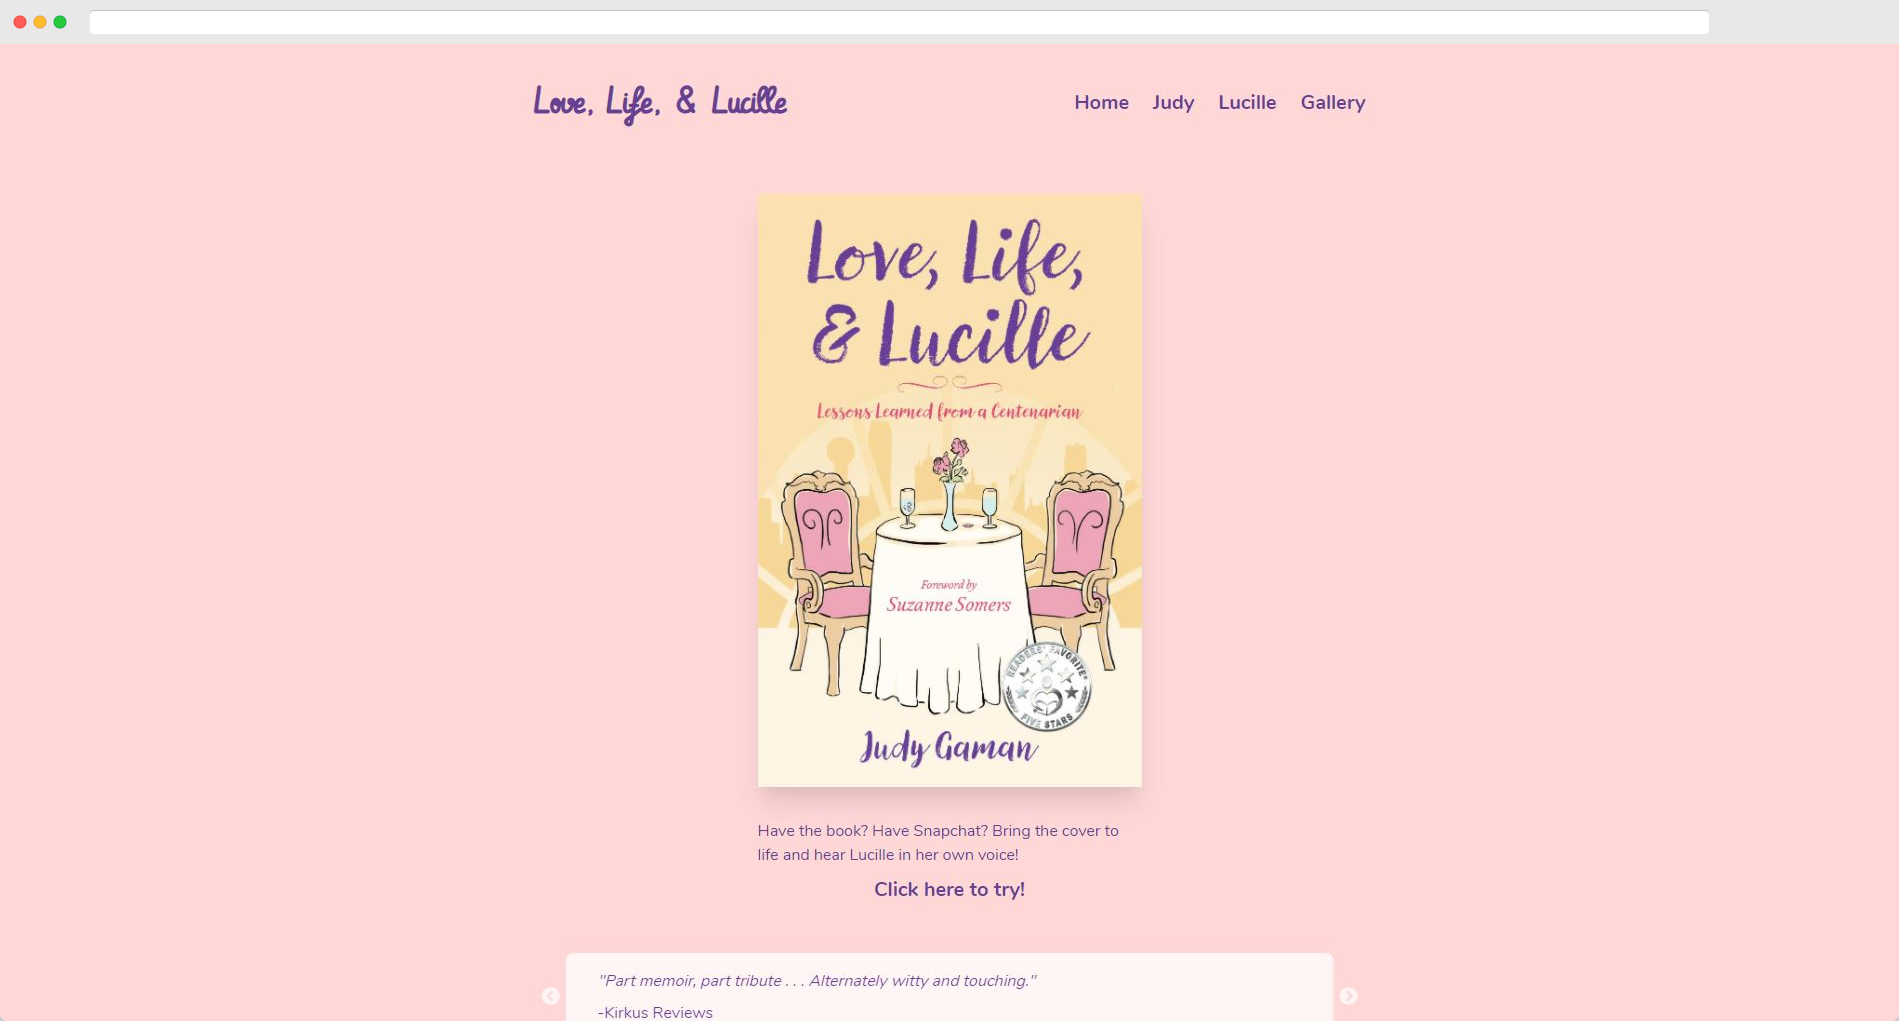 Love, Life, & Lucille